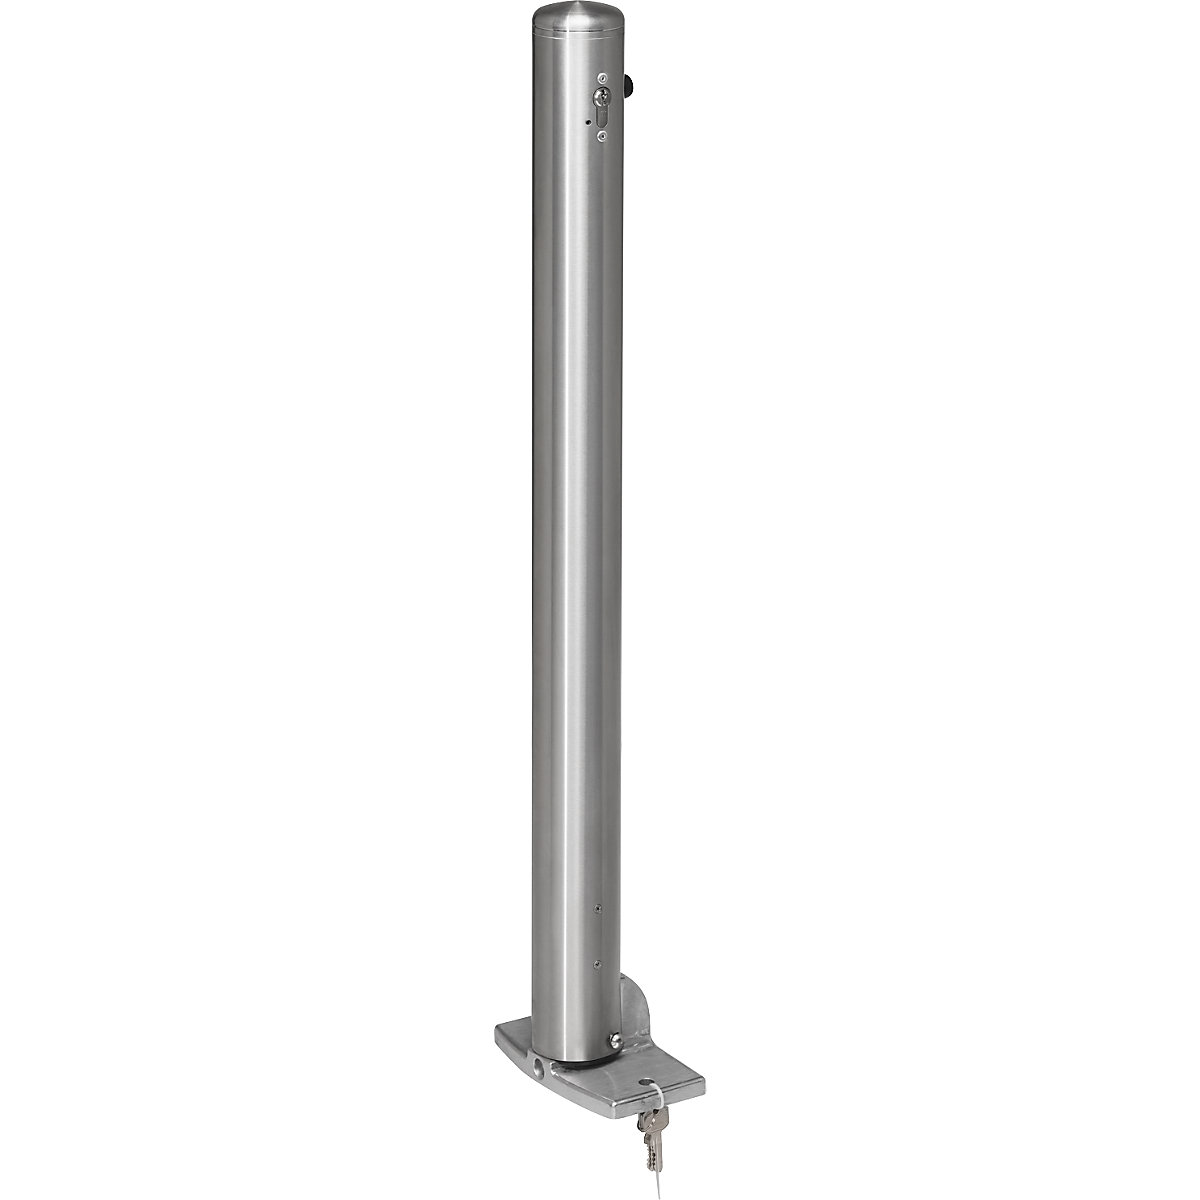 Stainless steel barrier post, with end cap, base plate to bolt in place, Ø 76 mm, profile cylinder